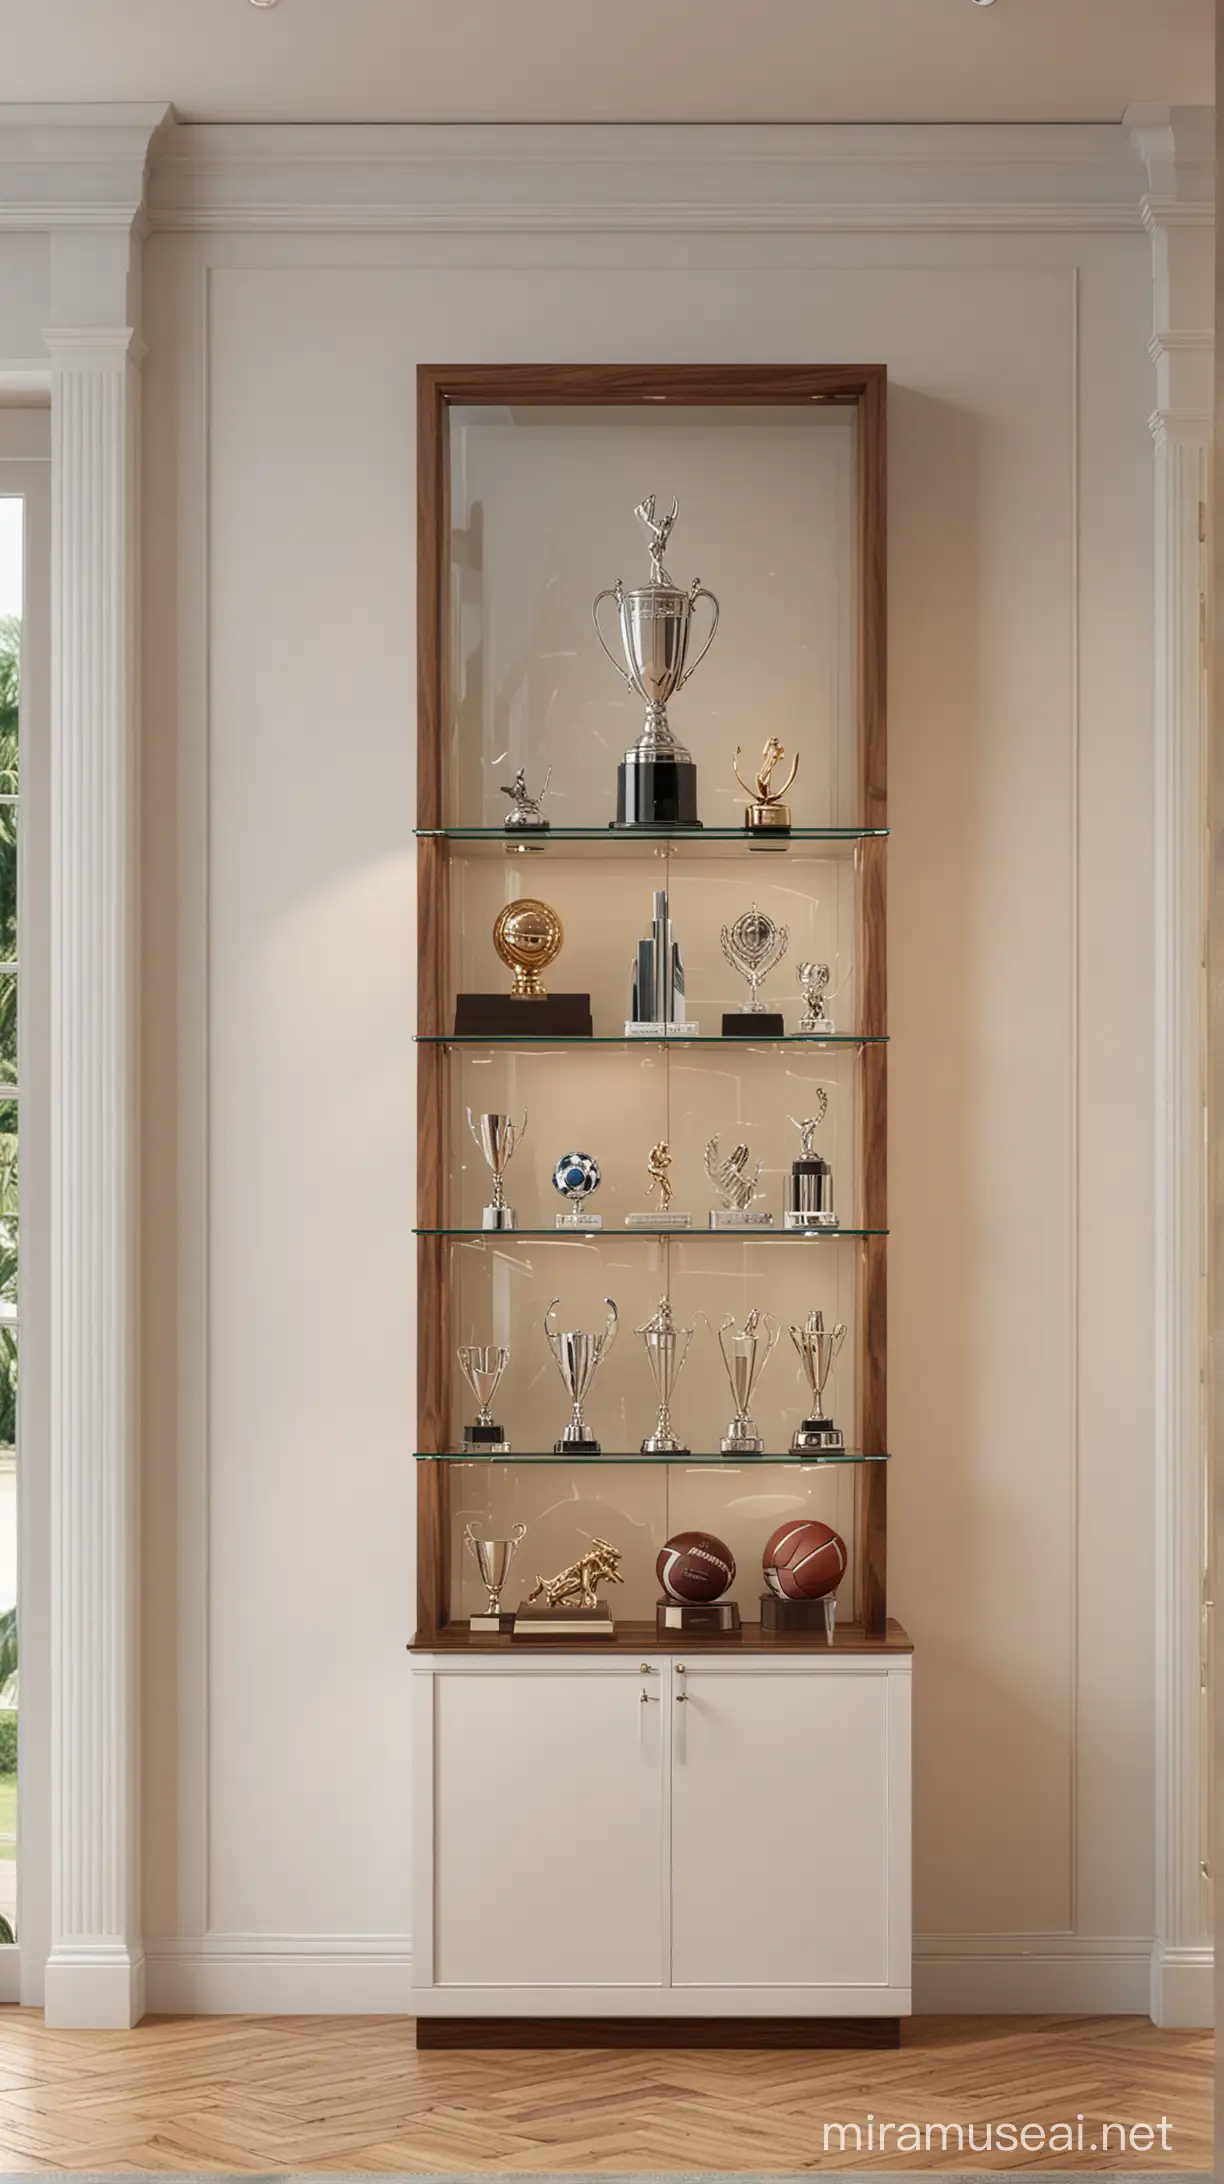 2020 Sports Trophy Room with Glass Cabinet